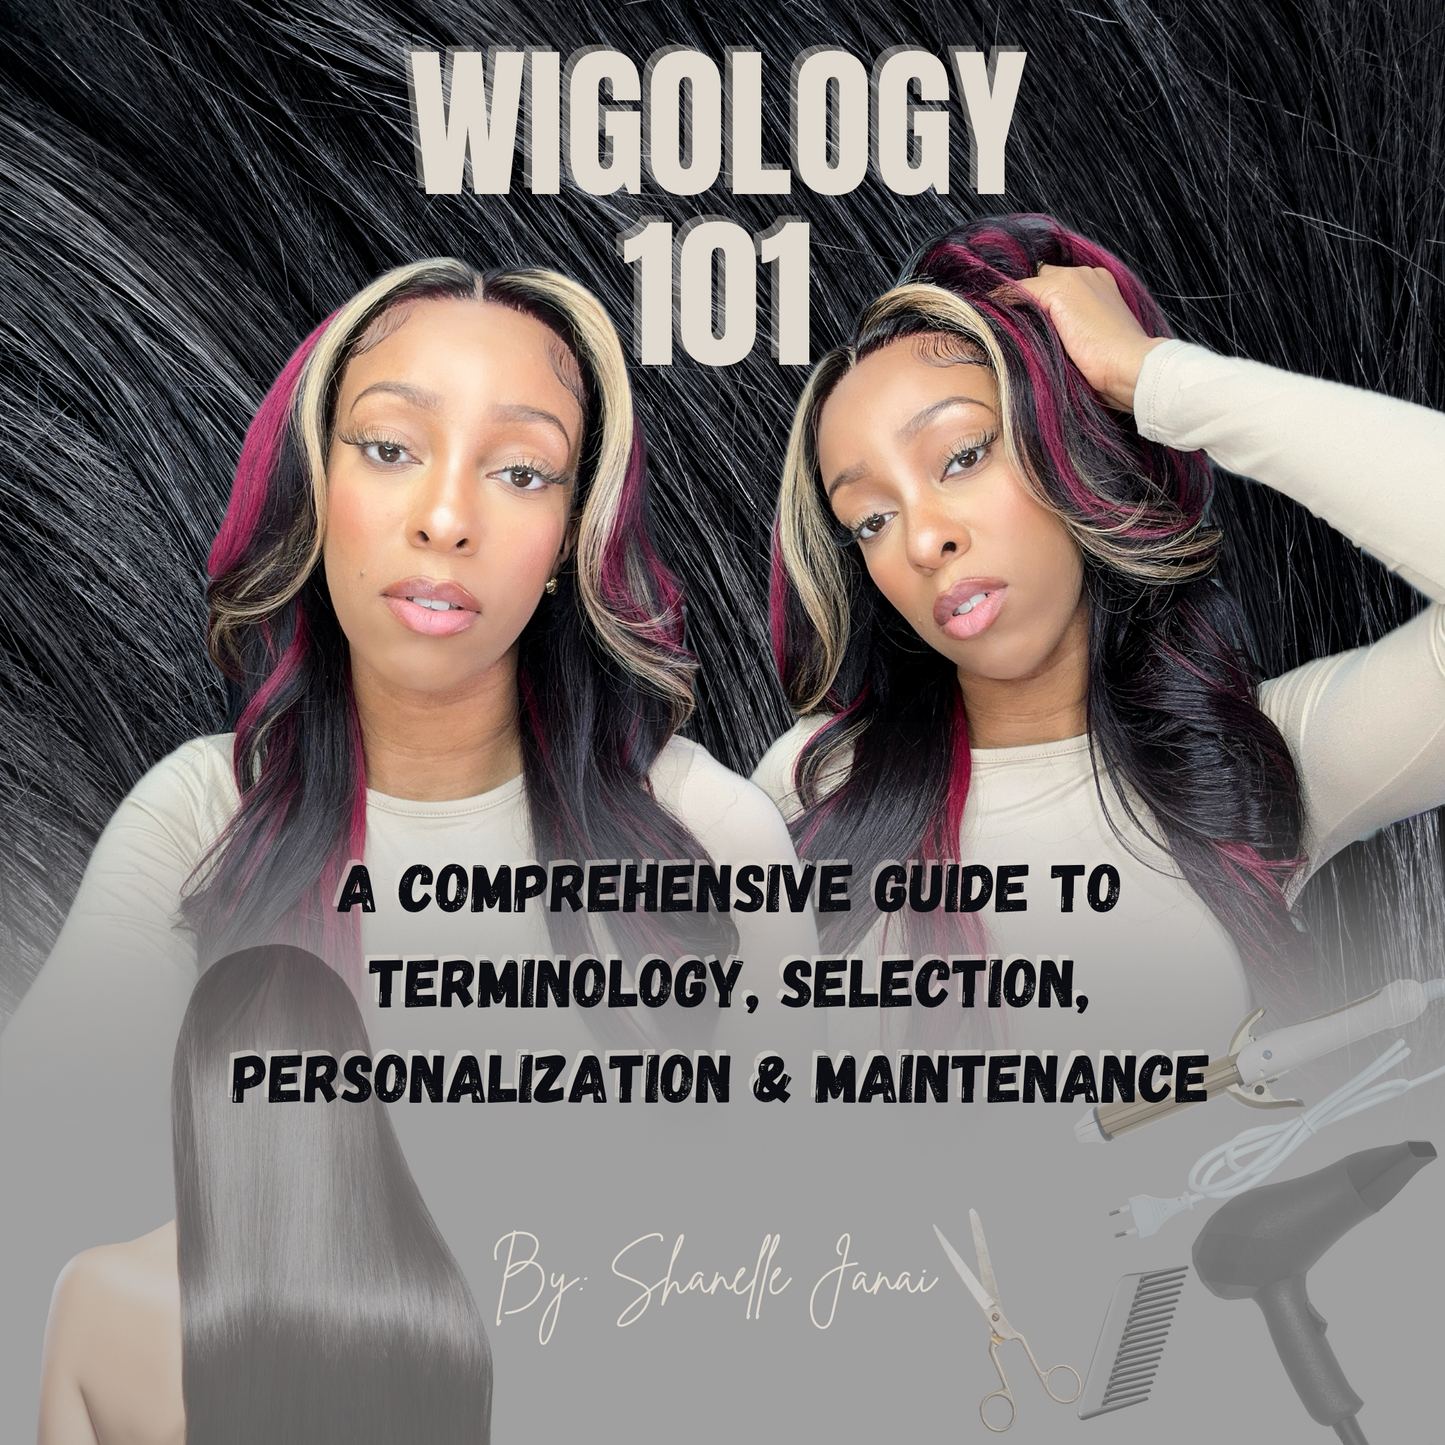 WIGOLOGY 101: A Comprehensive Guide To Terminology, Selection, Personalization, & Maintenance